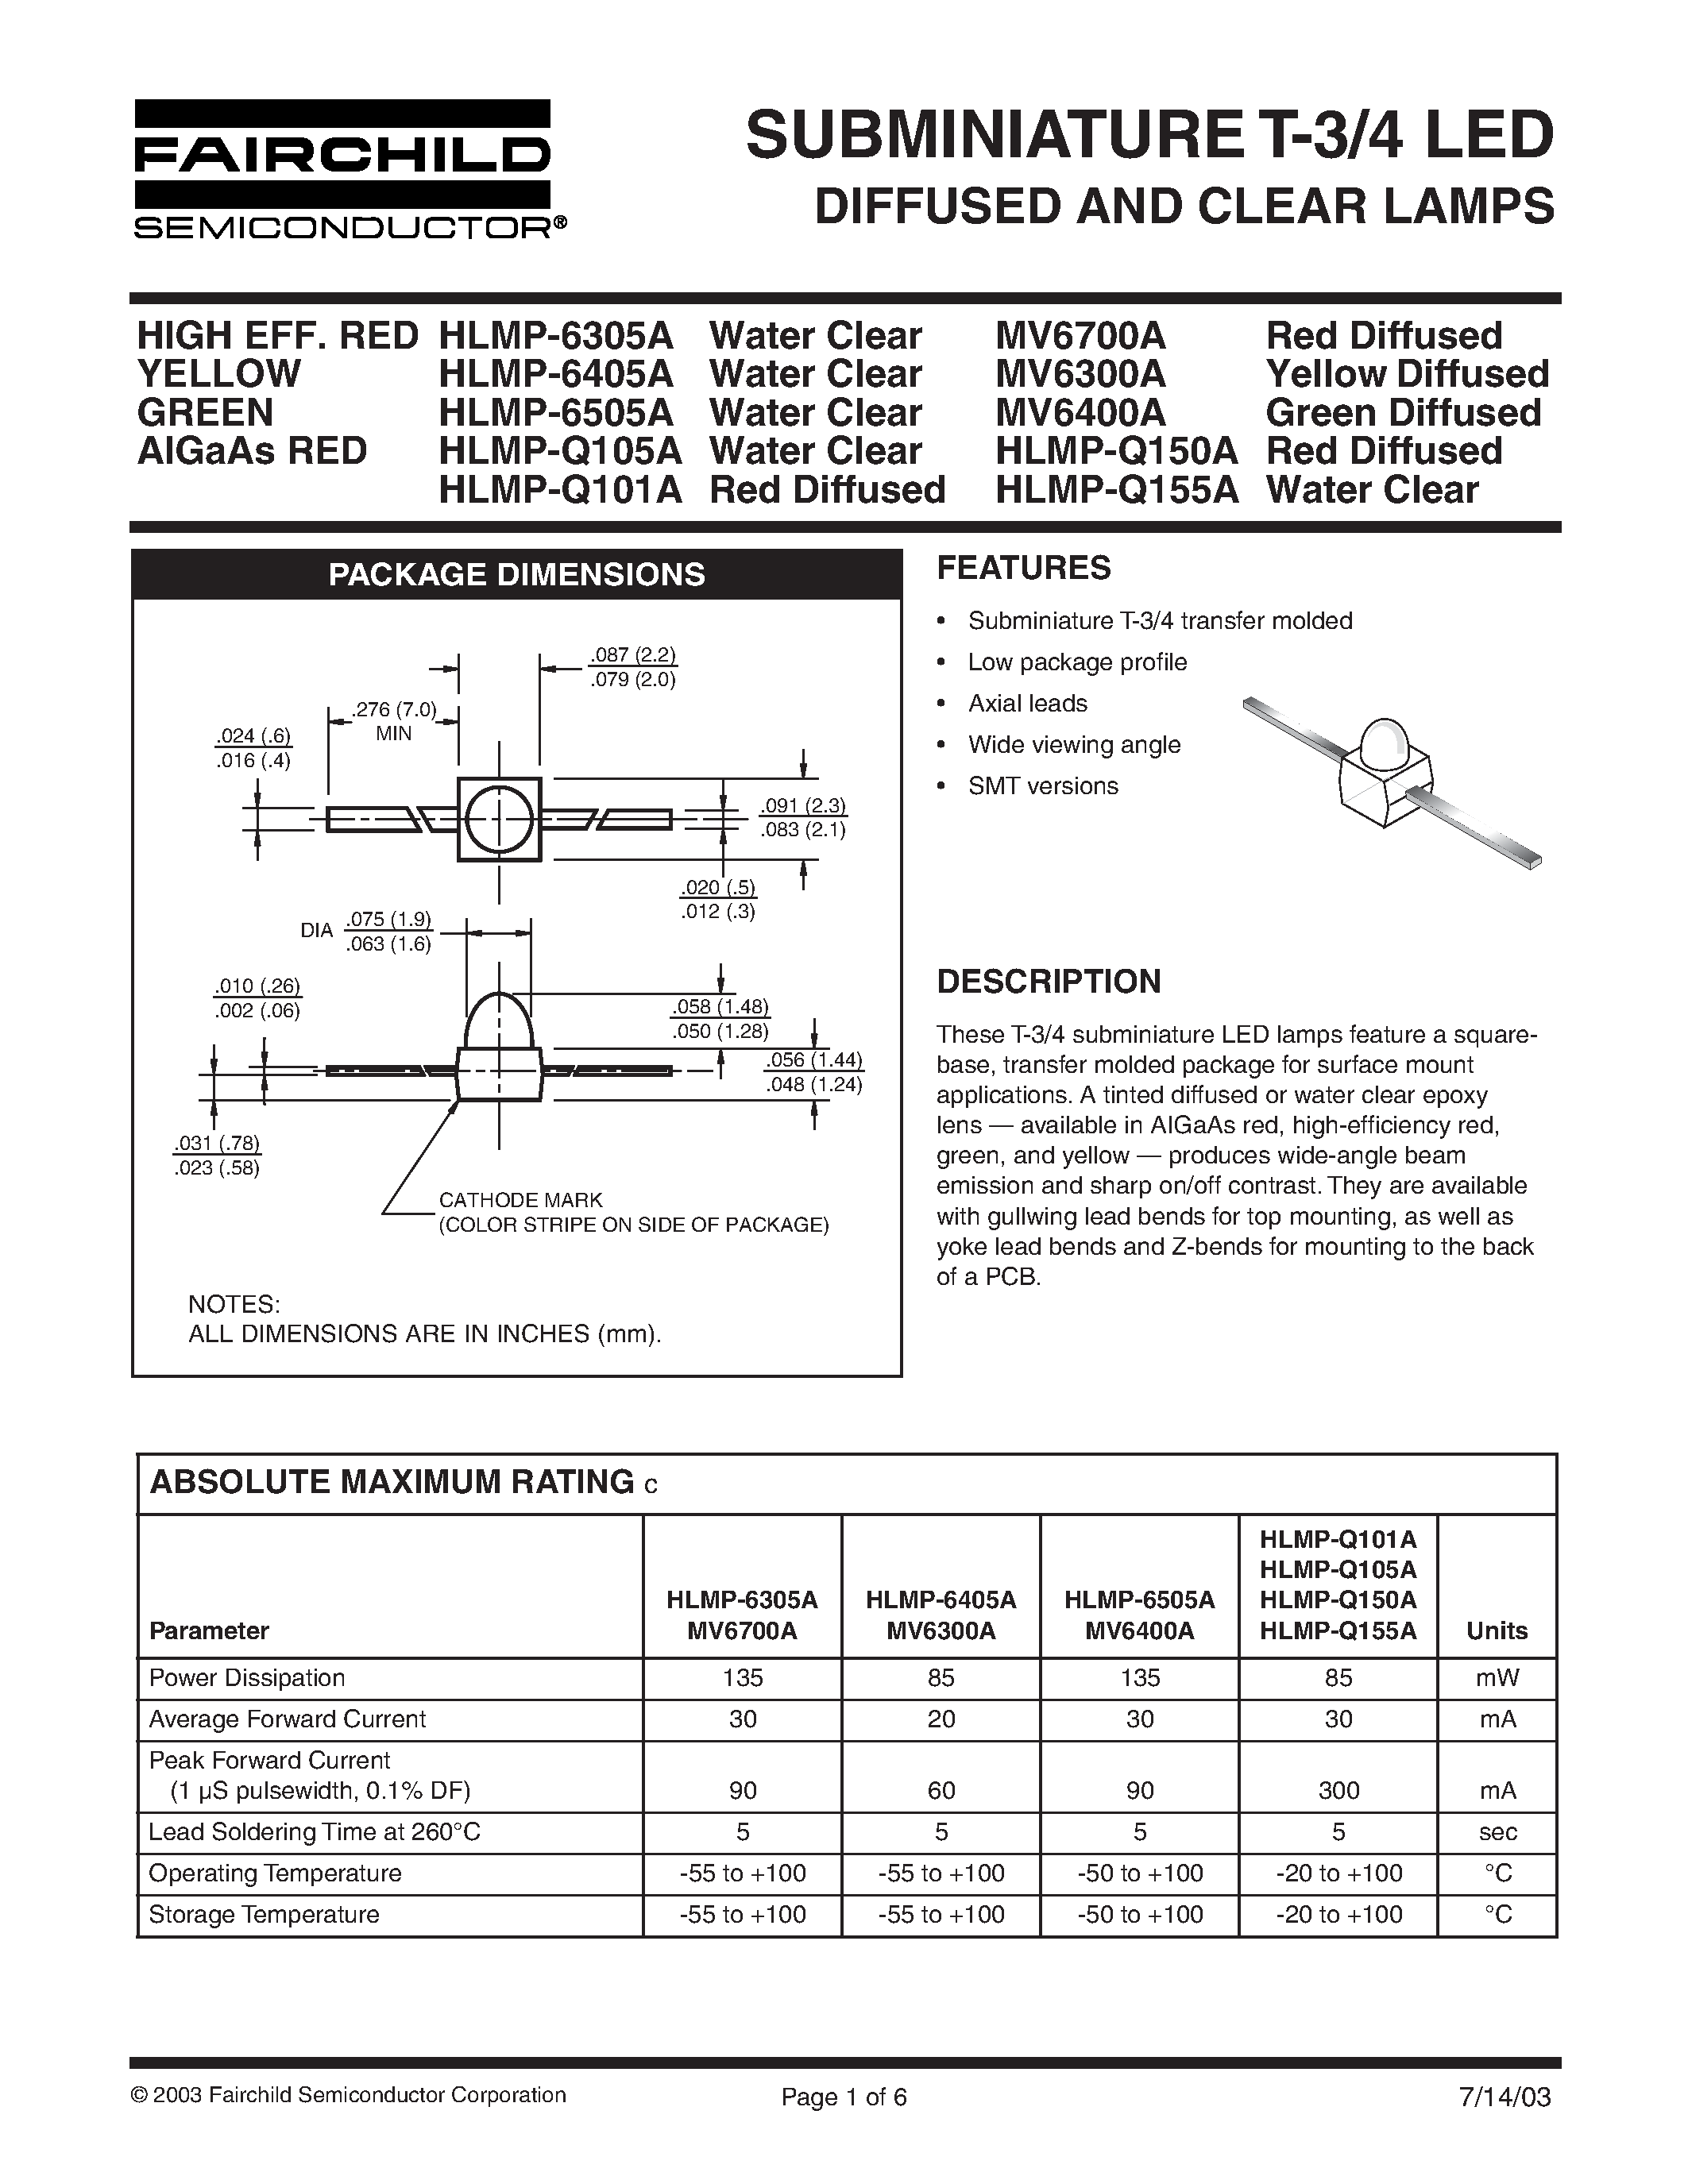 Datasheet MV6300A - (MV6x00A) SUBMINIATURE T-3/4 LED DIFFUSED and CLEAR LAMPS page 1